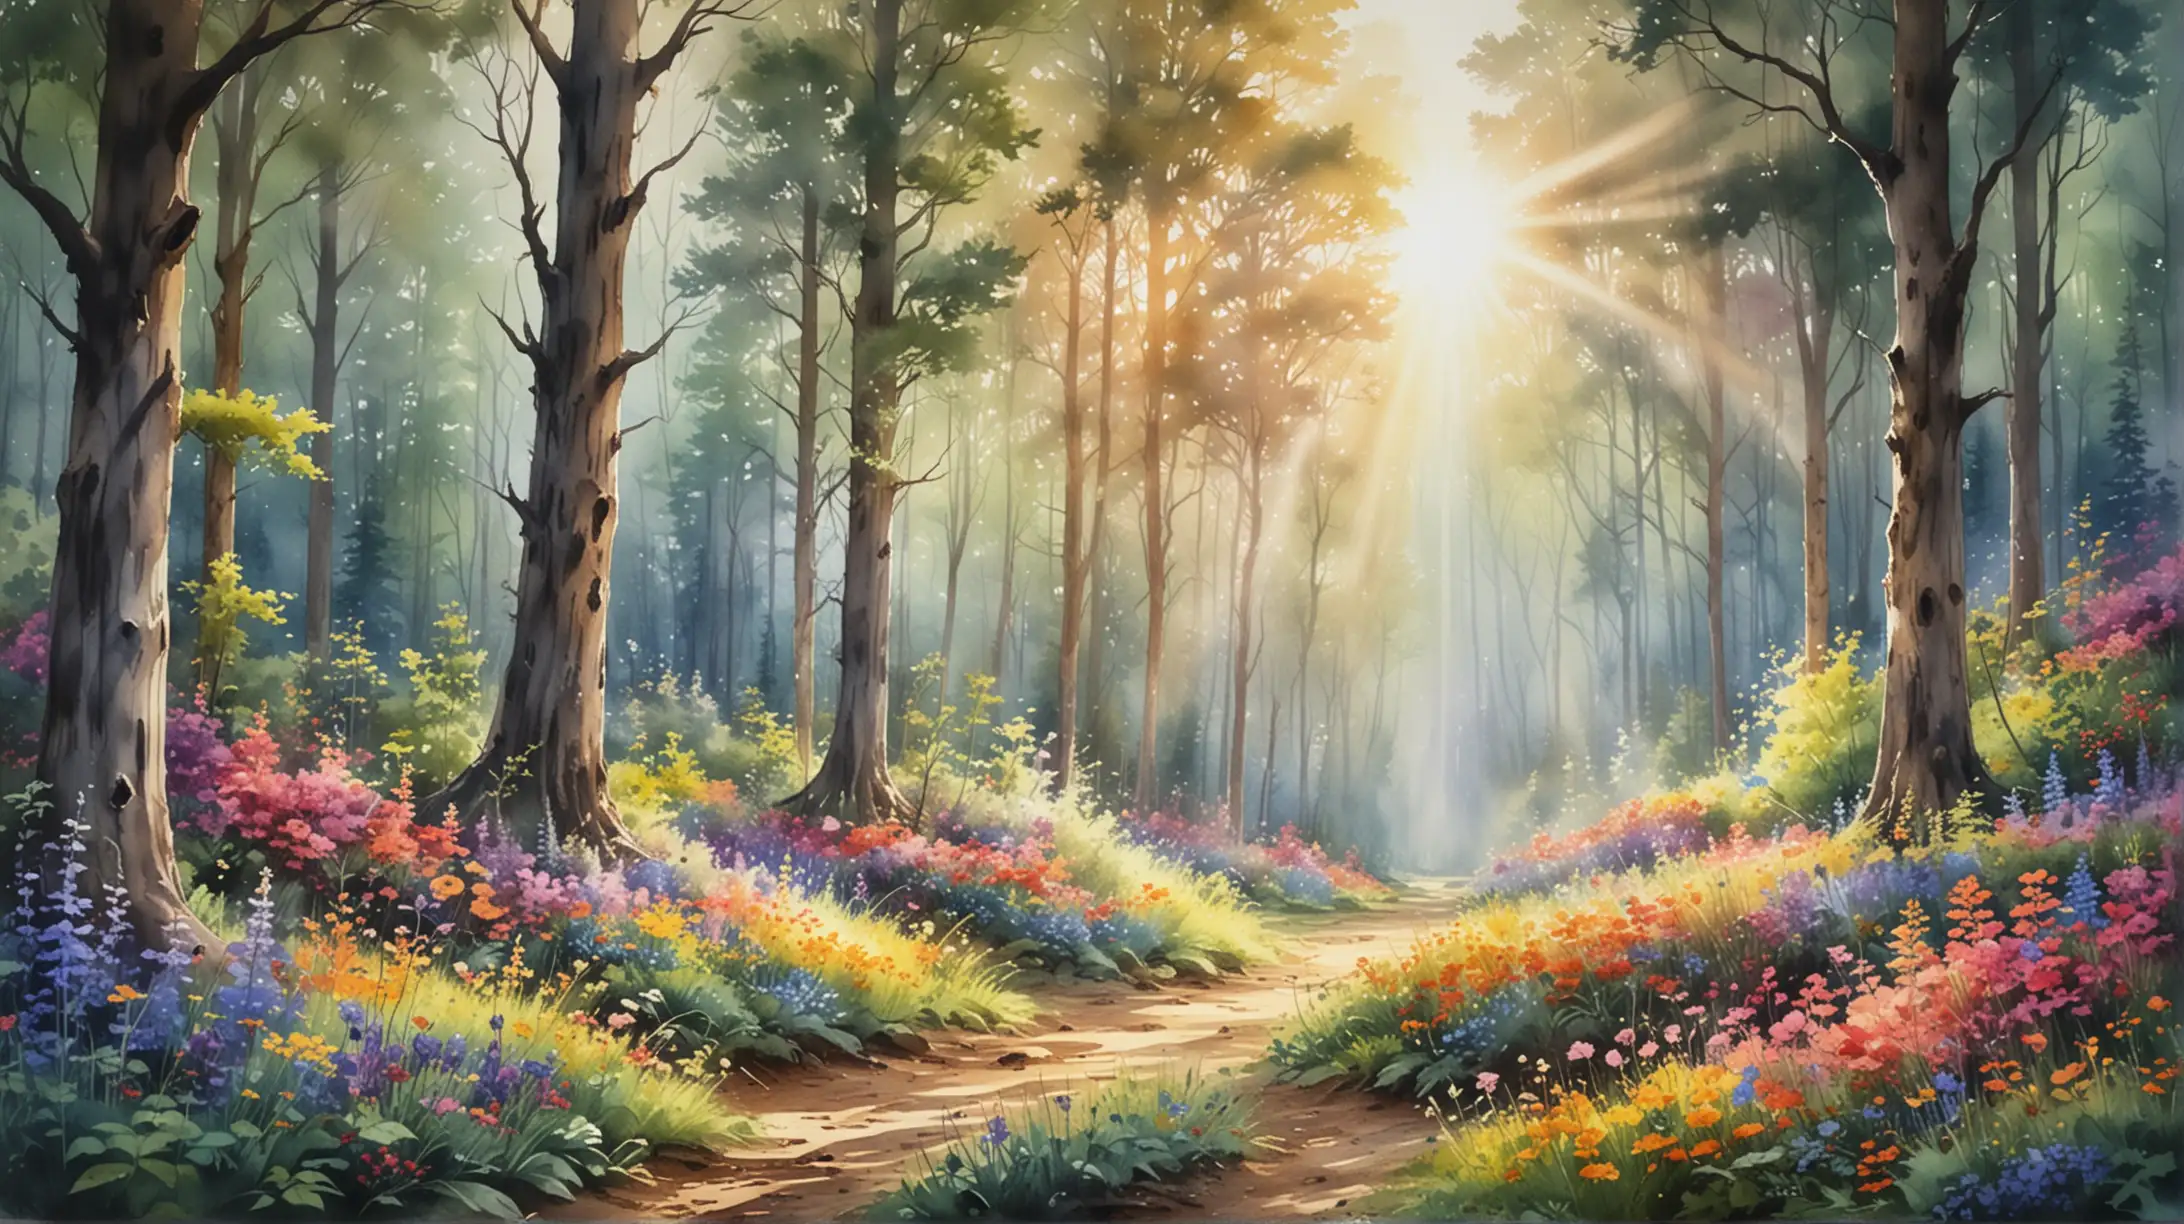 forest scene with light rays shining down from above through the trees, colorful flowers throughout the landscape, in the style of a watercolor